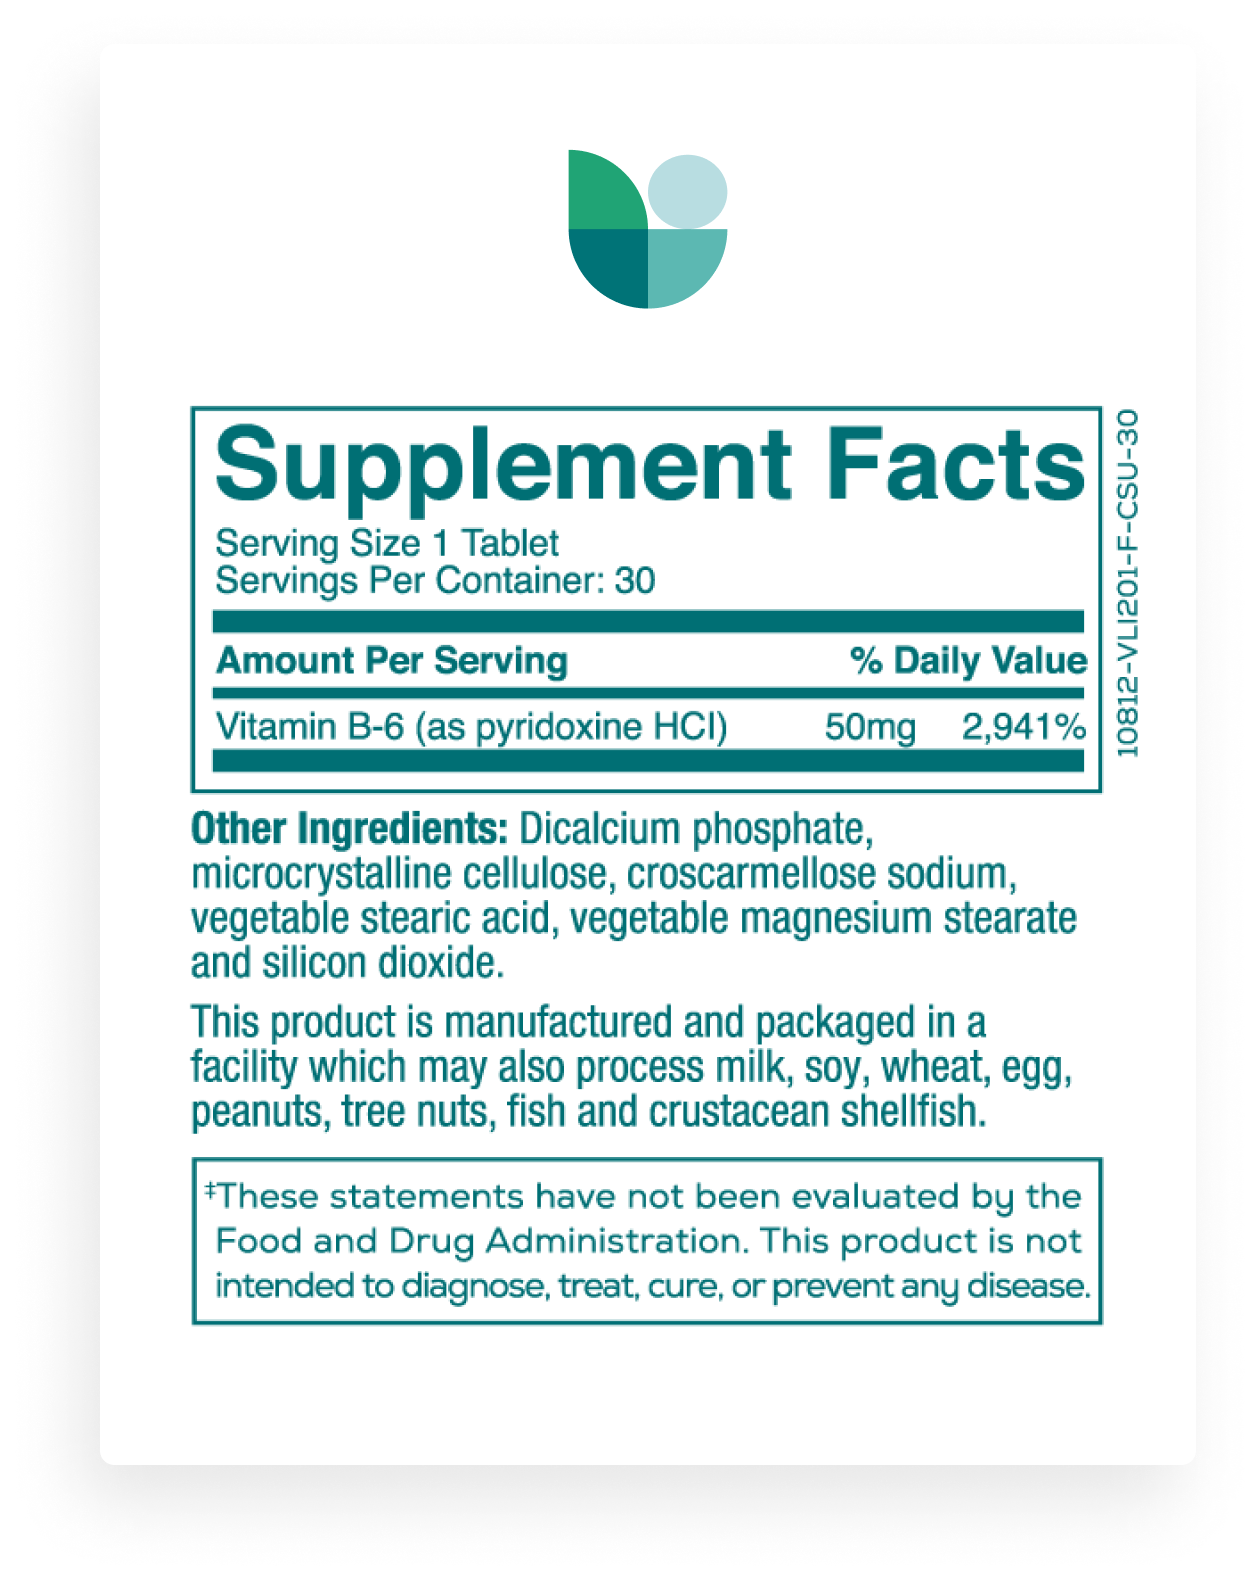 Supplement Facts for Vitamin B6 Tablets